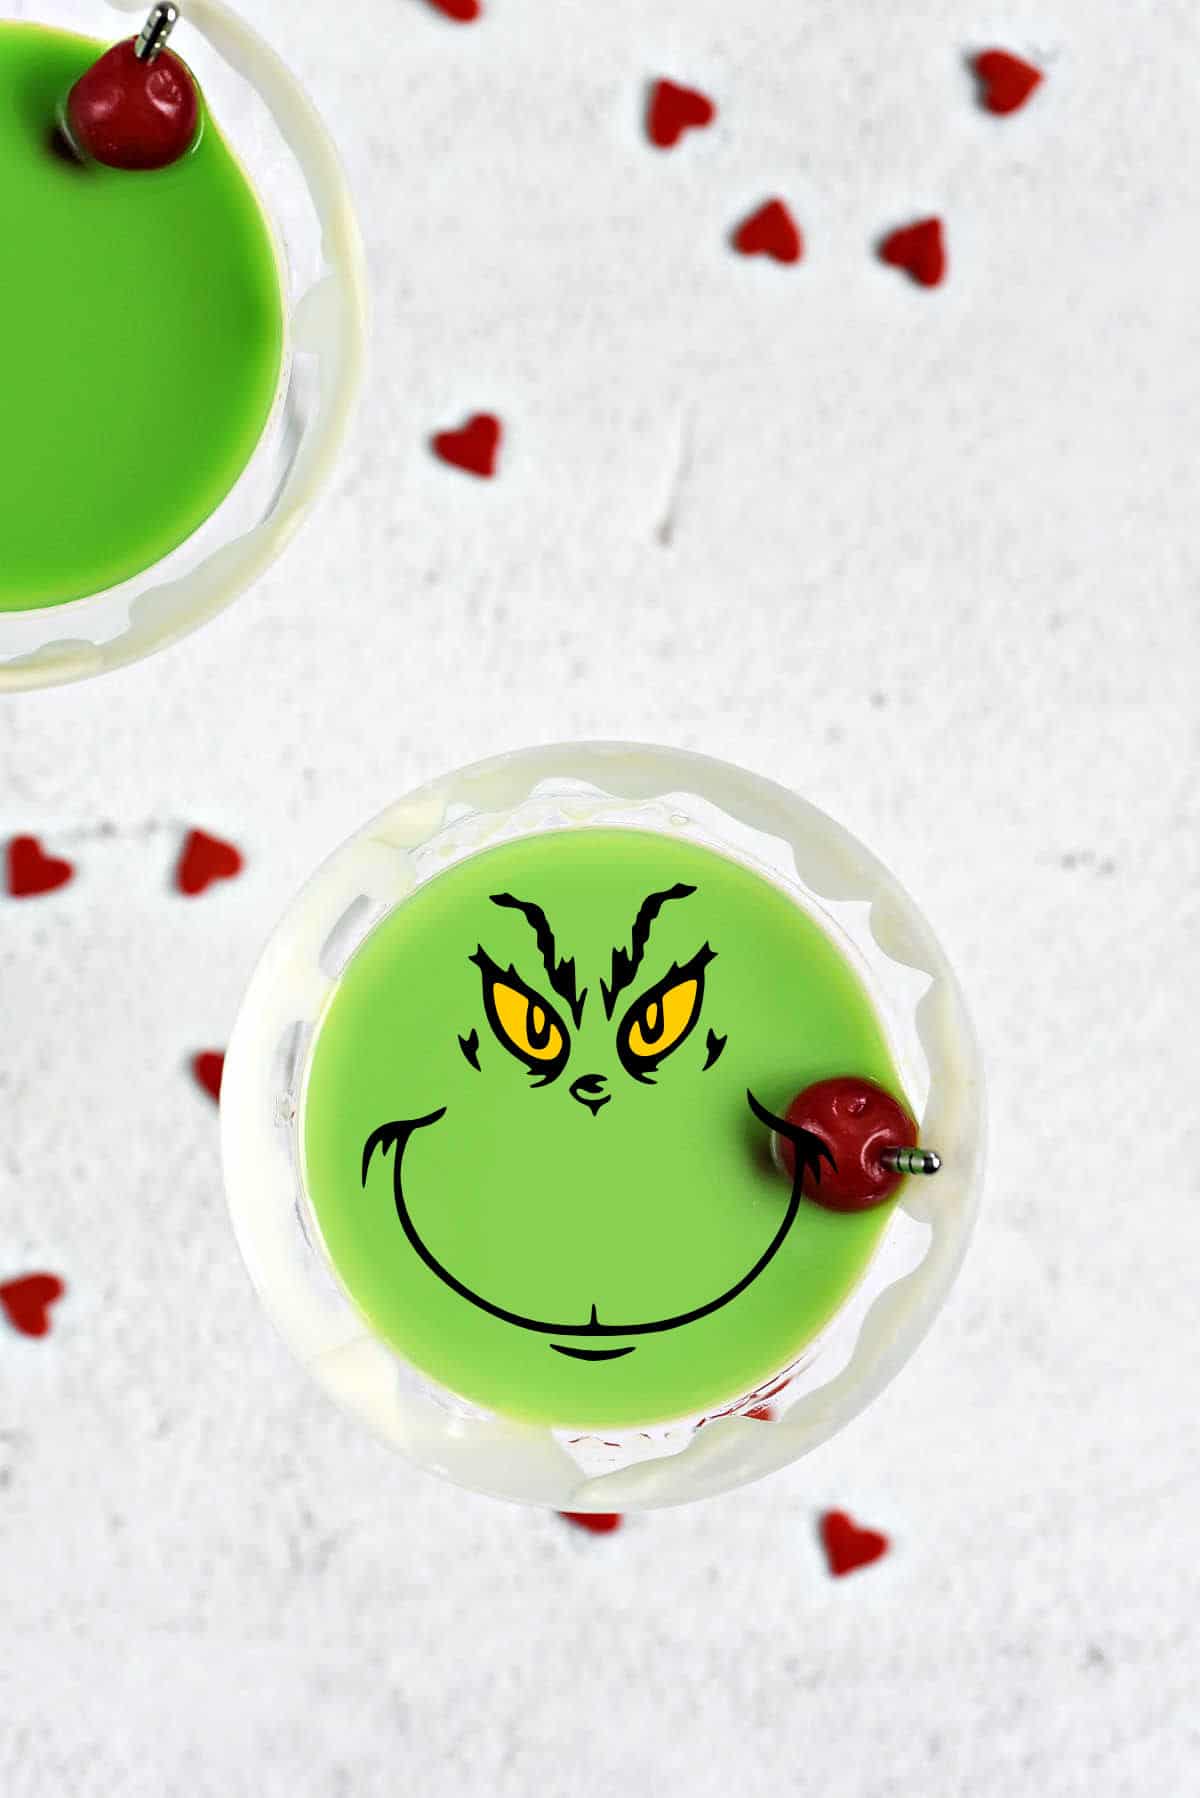 Looking down on a green Grinch Martini with white drizzle around the rim of the martini glass and a Grinch face in the center.